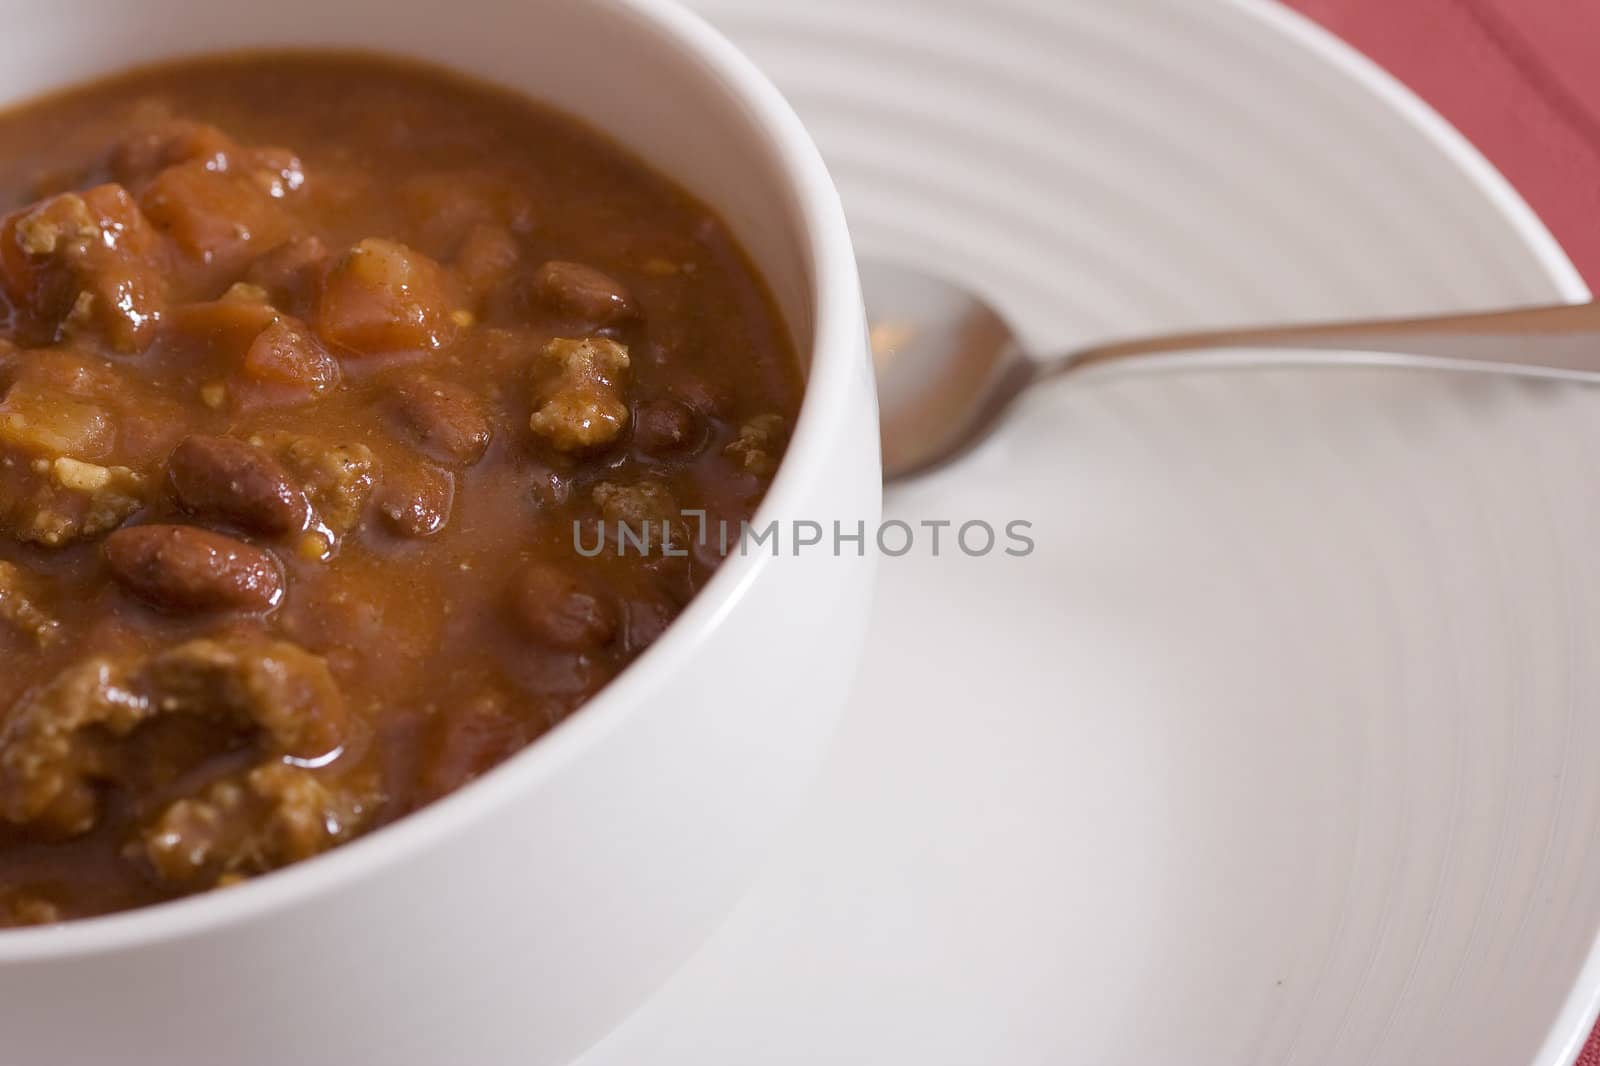 sweet home made chili by snokid